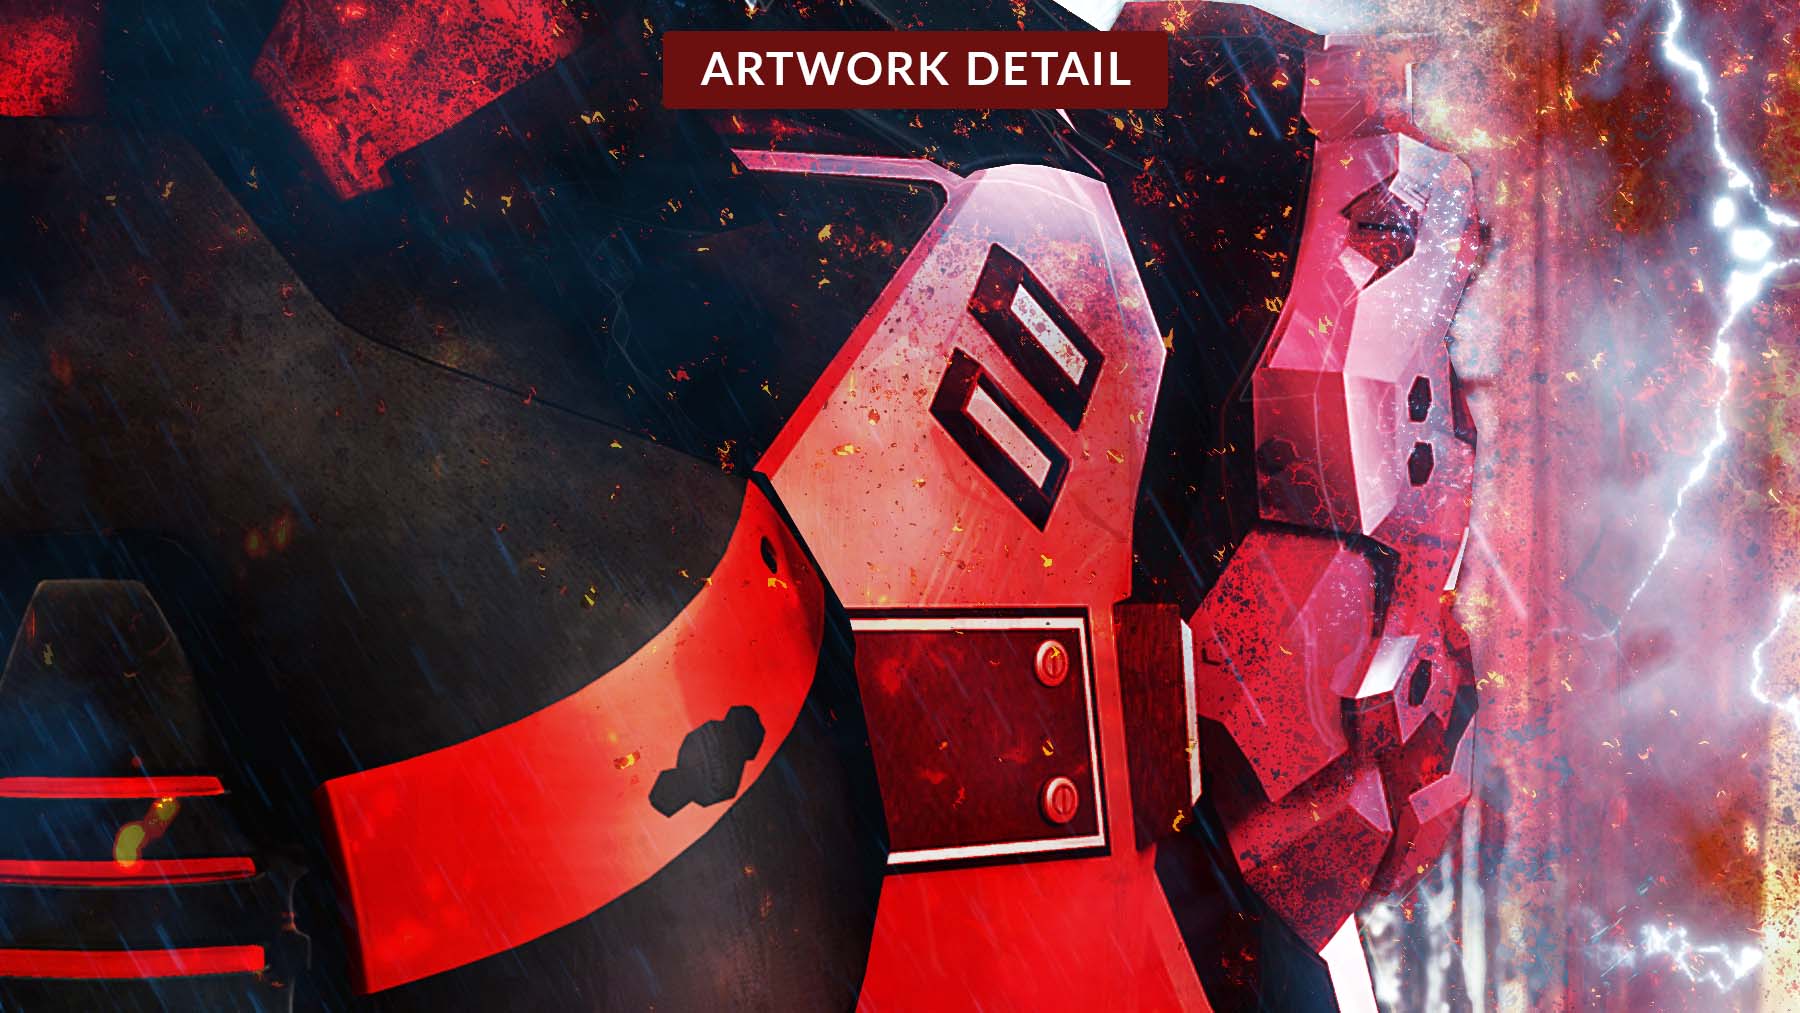 Close-up detail of the shoulder armour and exo-suit from The Lord Sentinel NFT collectible artwork